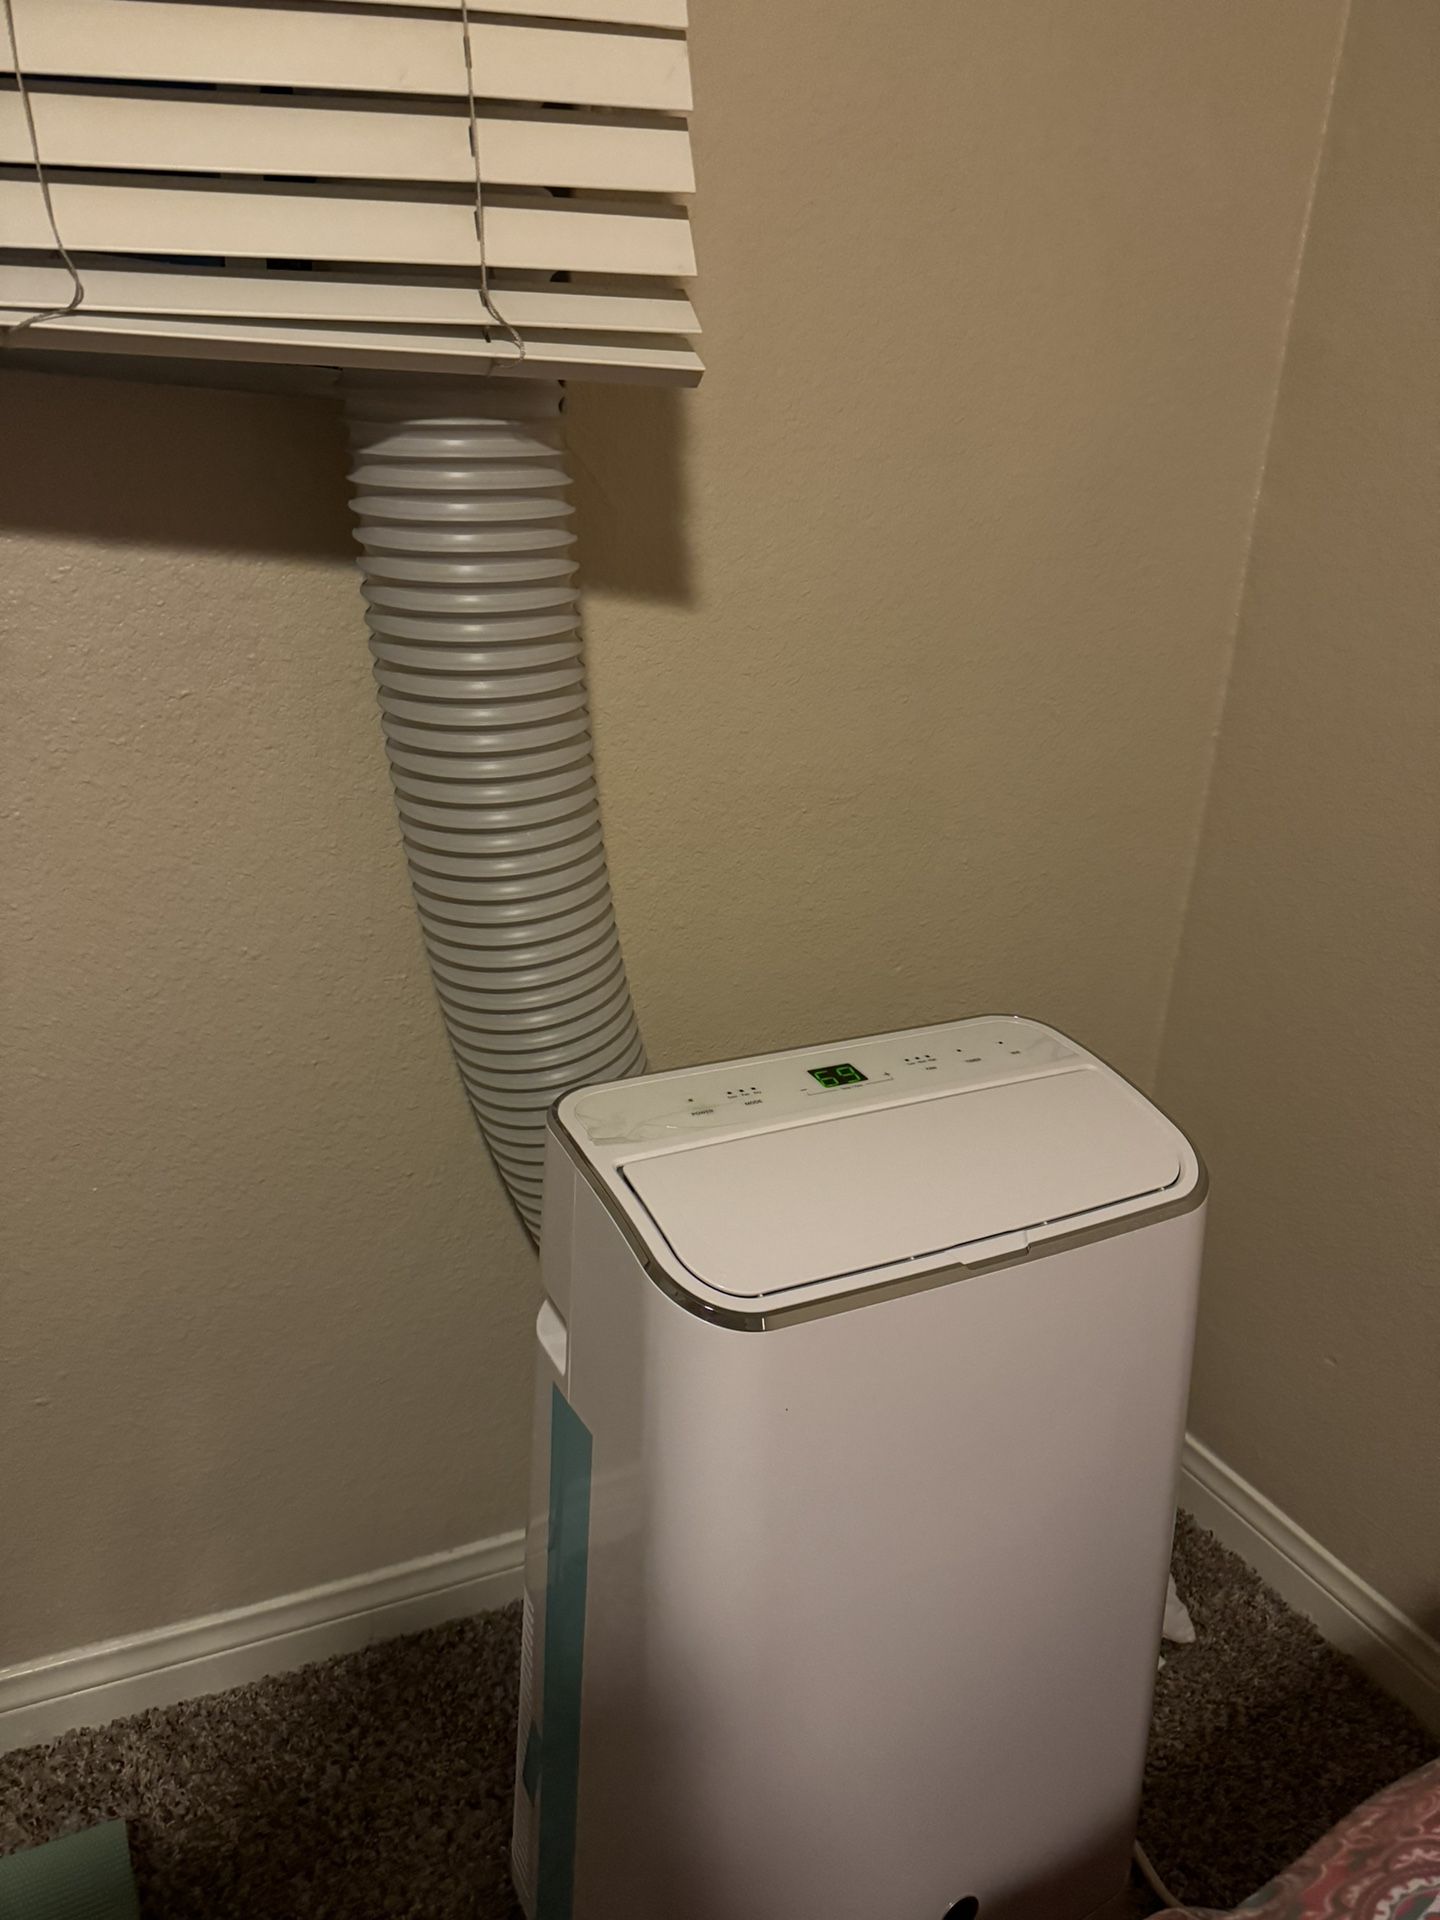 GE Portable air Conditioning Unit Like New